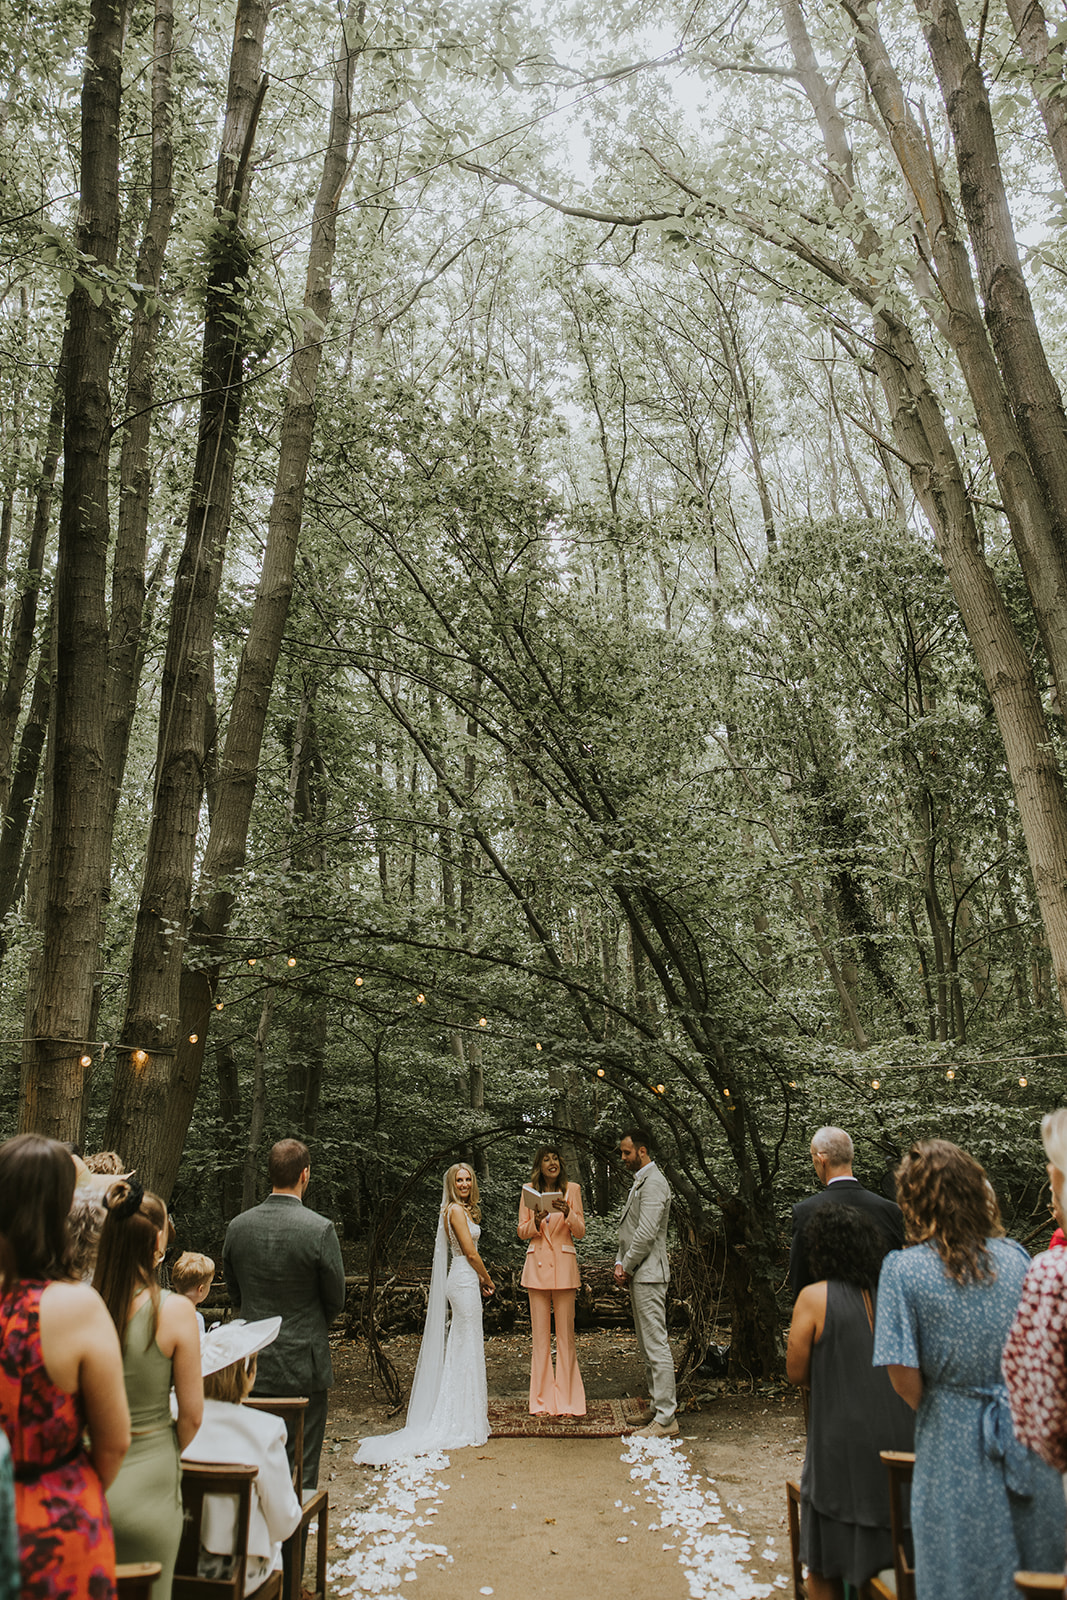 Getting married under the dense woodland canopy